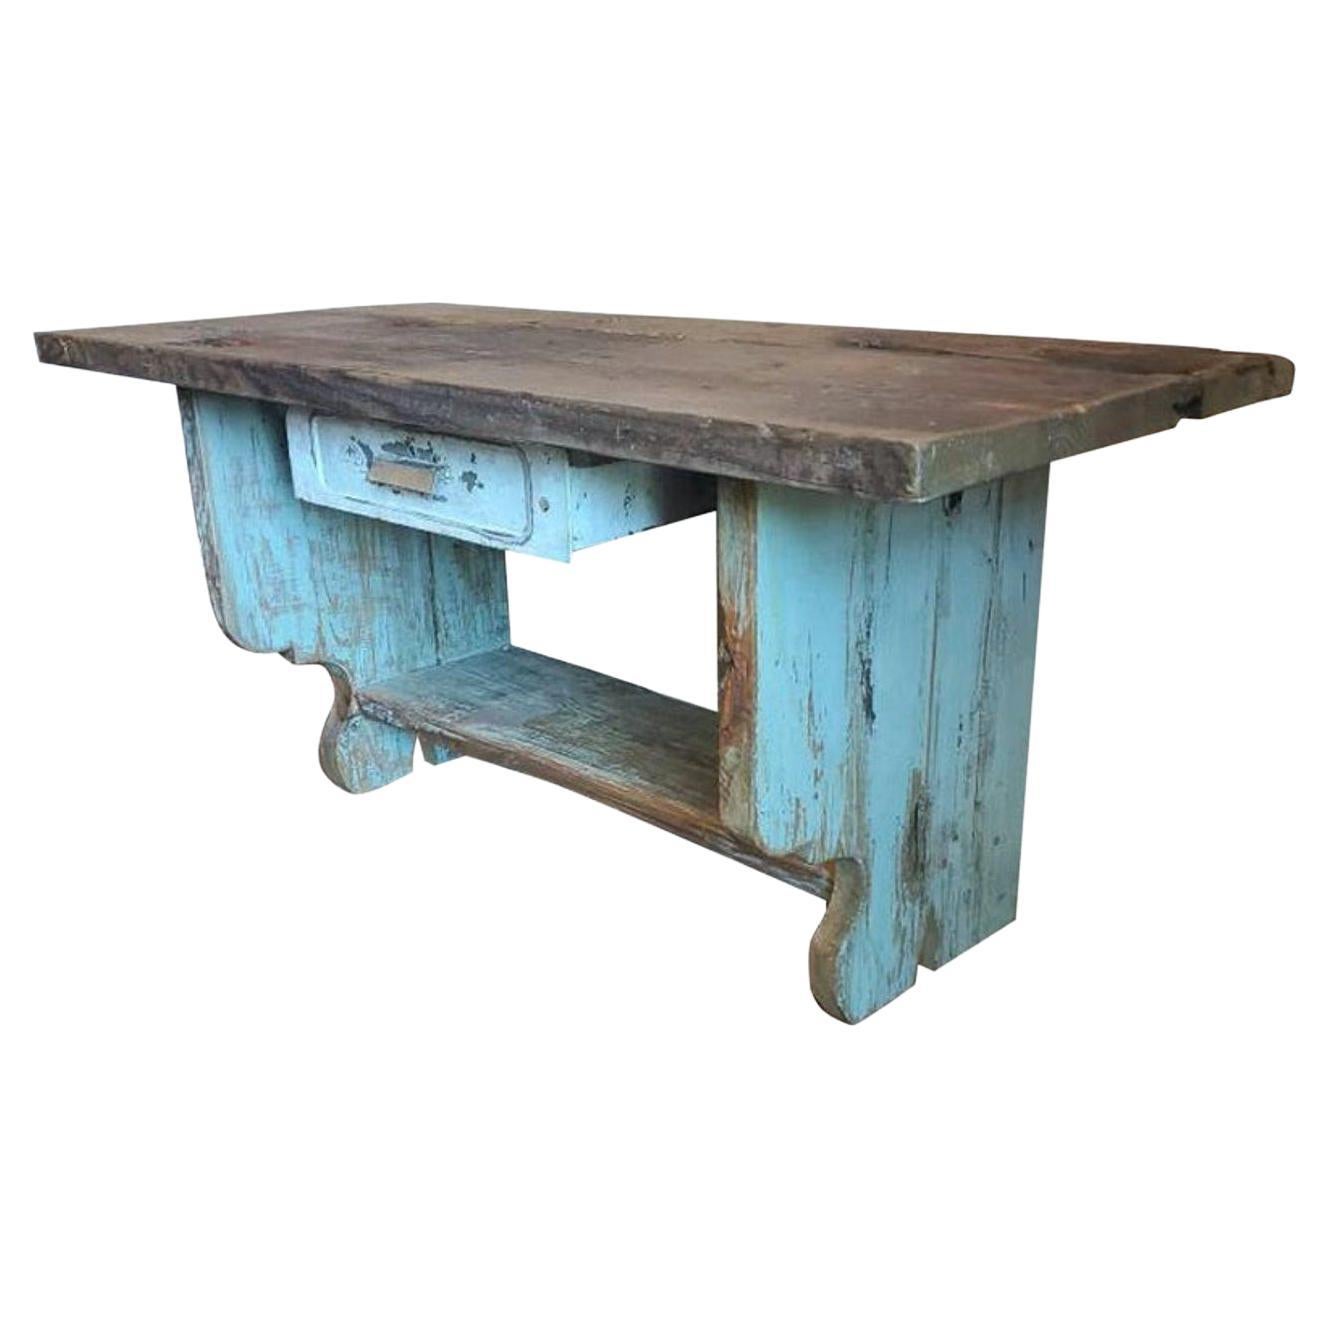 Antique Country Farmhouse Rustic Bench